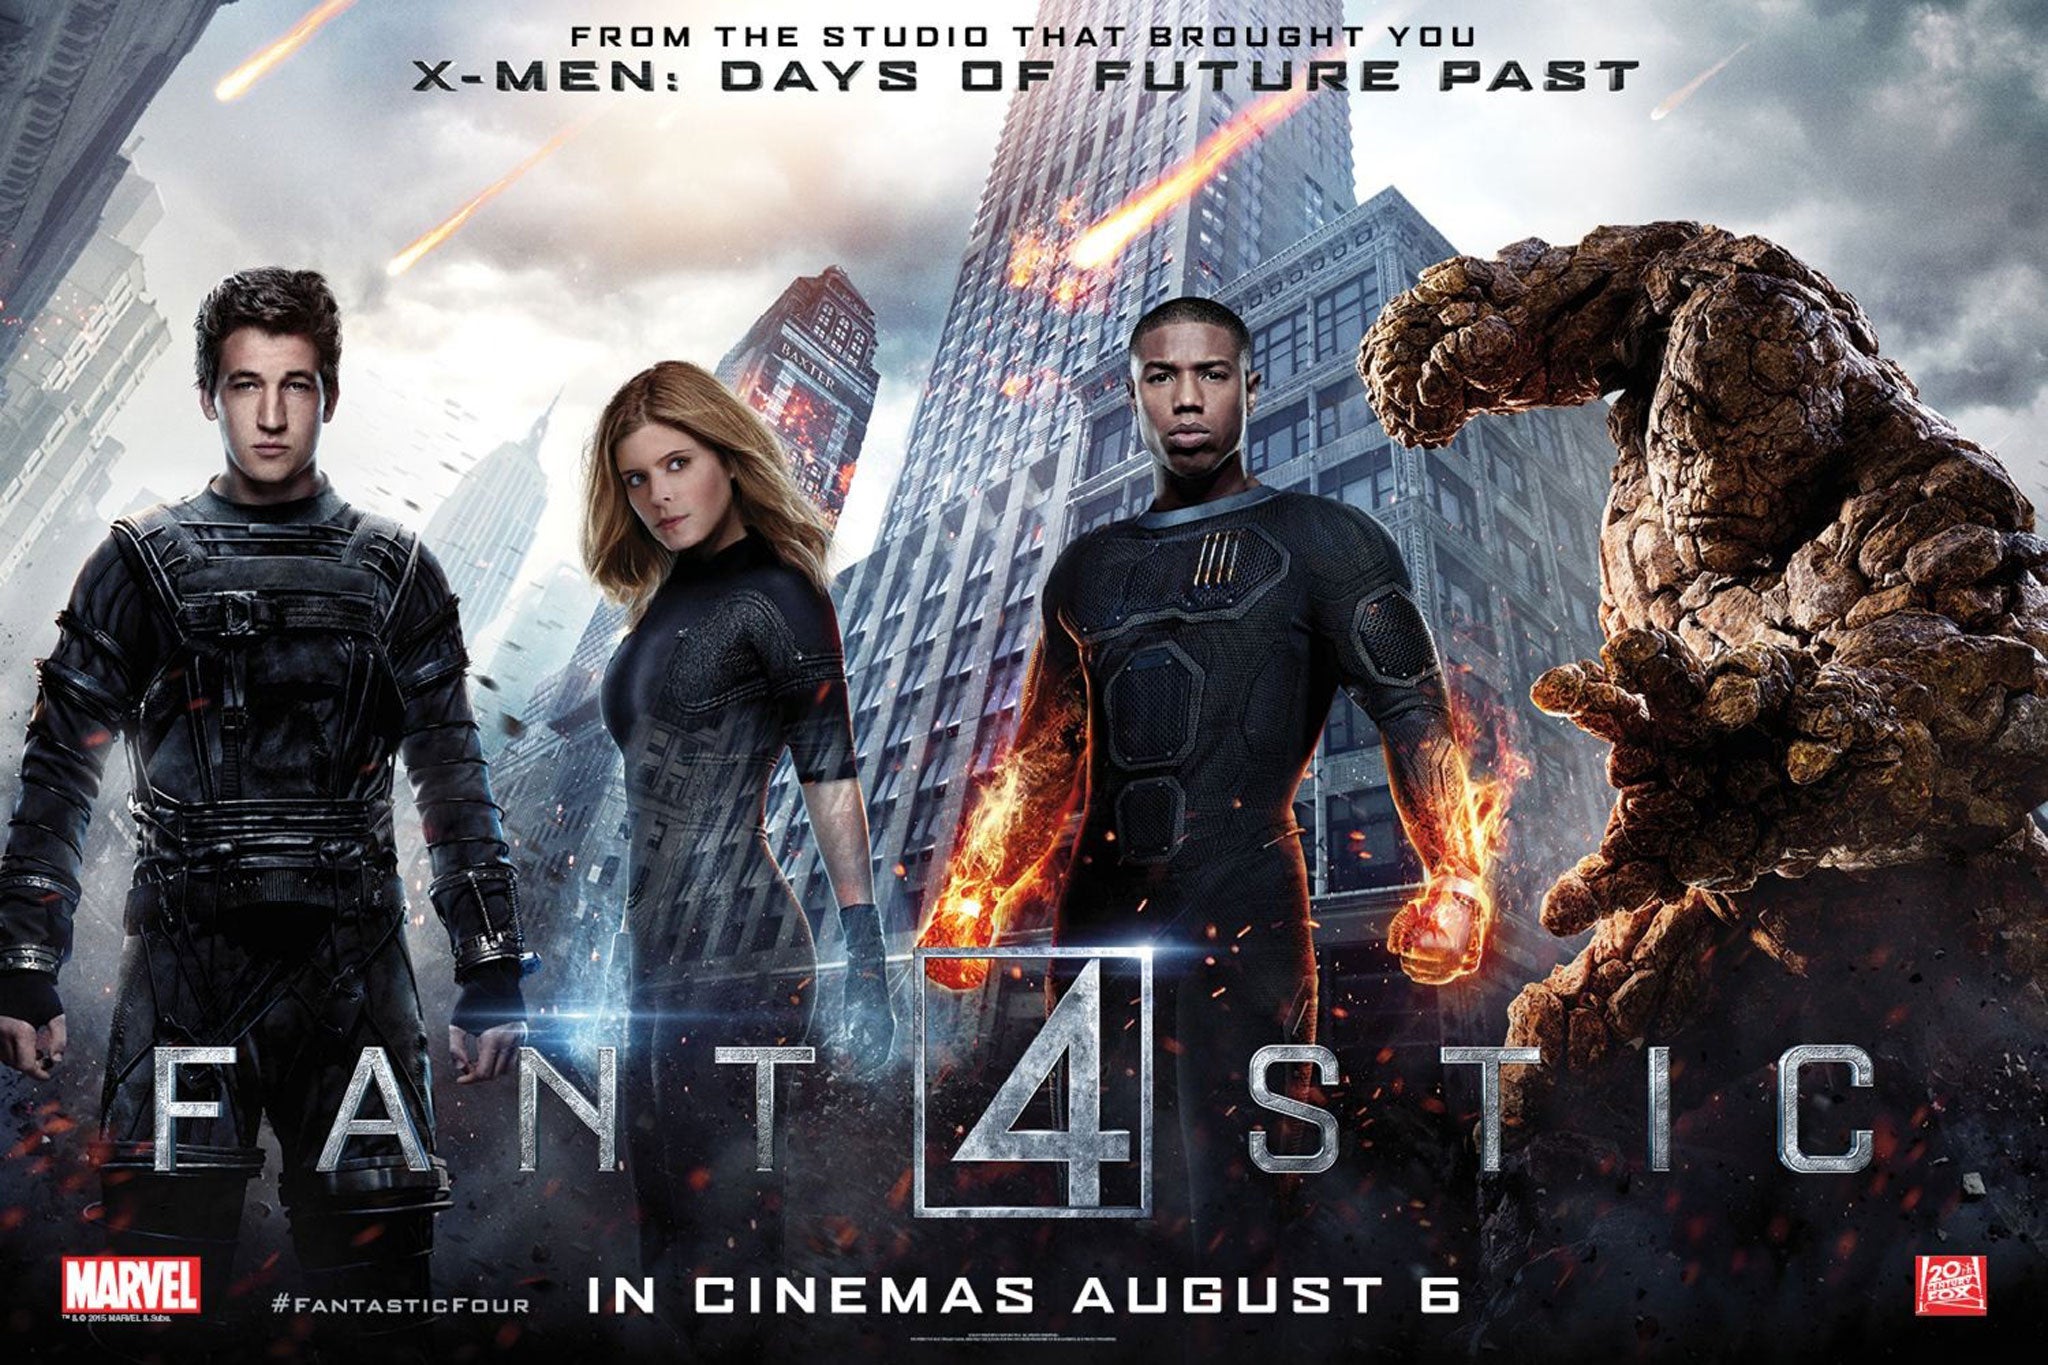 With the updated reboot of Fantastic Four, the Fox-inherited Marvel property moves into Weird Science territory